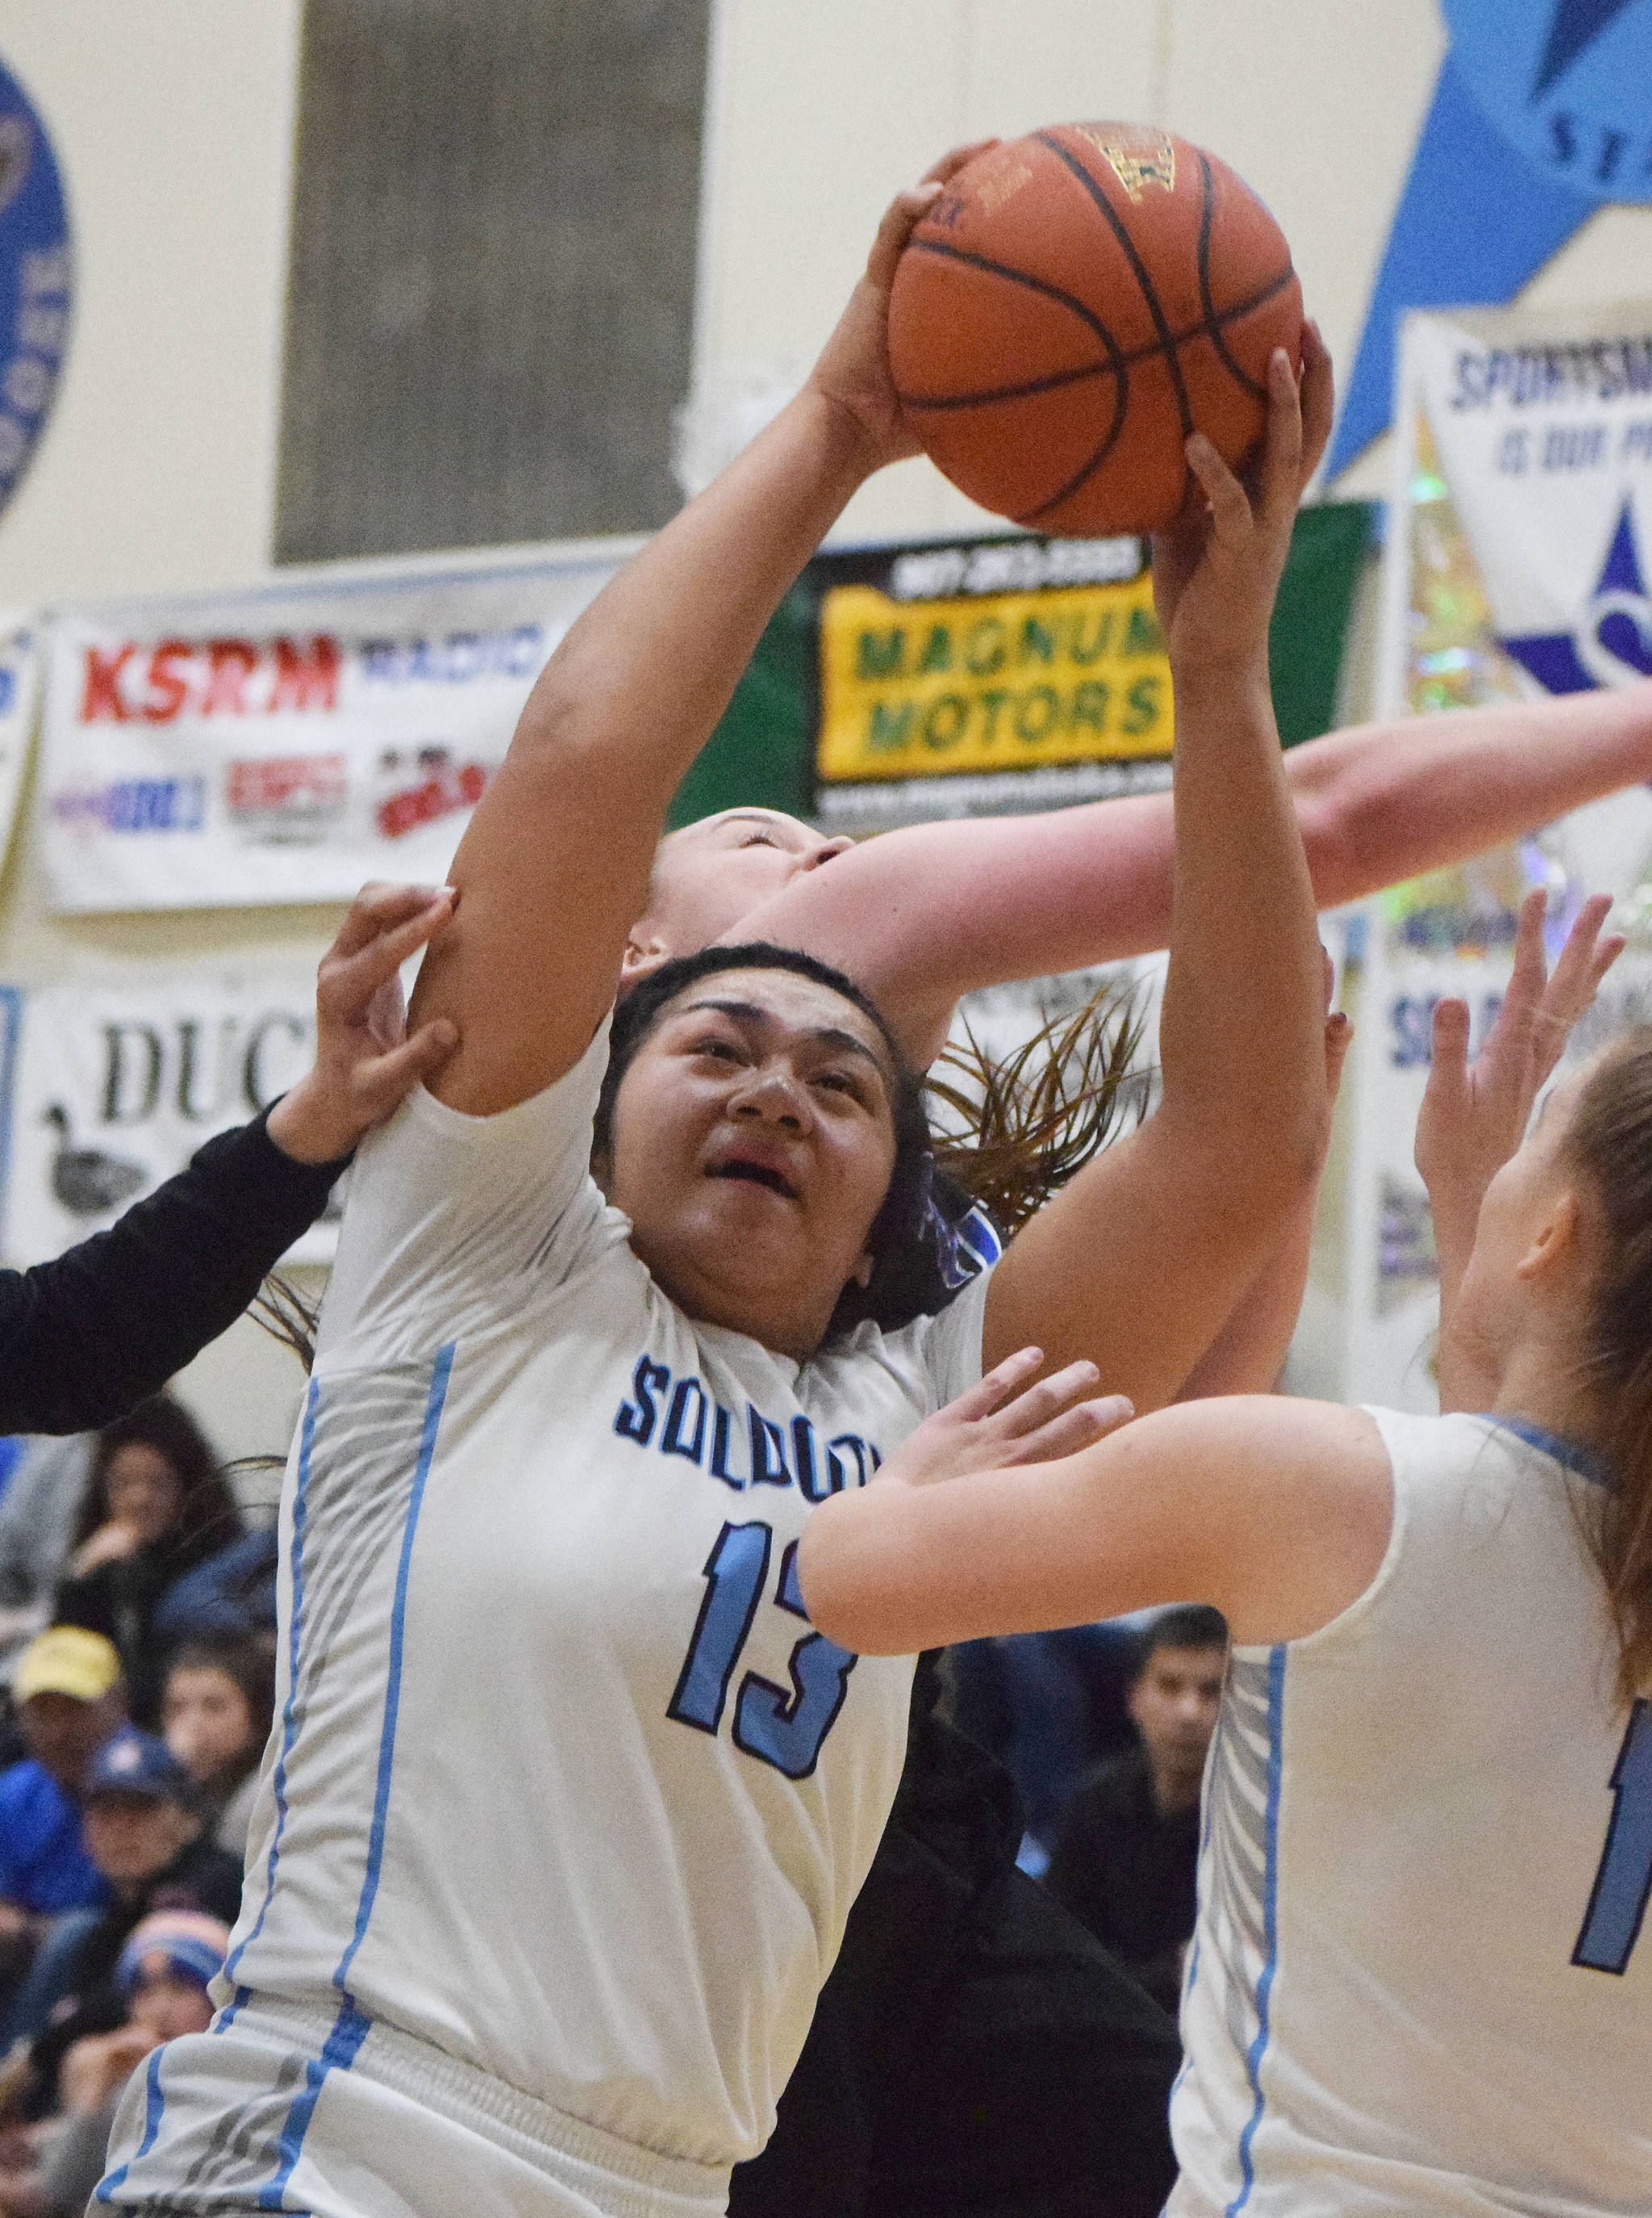 Soldotna’s Ituau Tuisaula (13) grabs a rebound Friday night in the Northern Lights Conference semifinals against Palmer at Soldotna High School. (Photo by Joey Klecka/Peninsula Clarion)